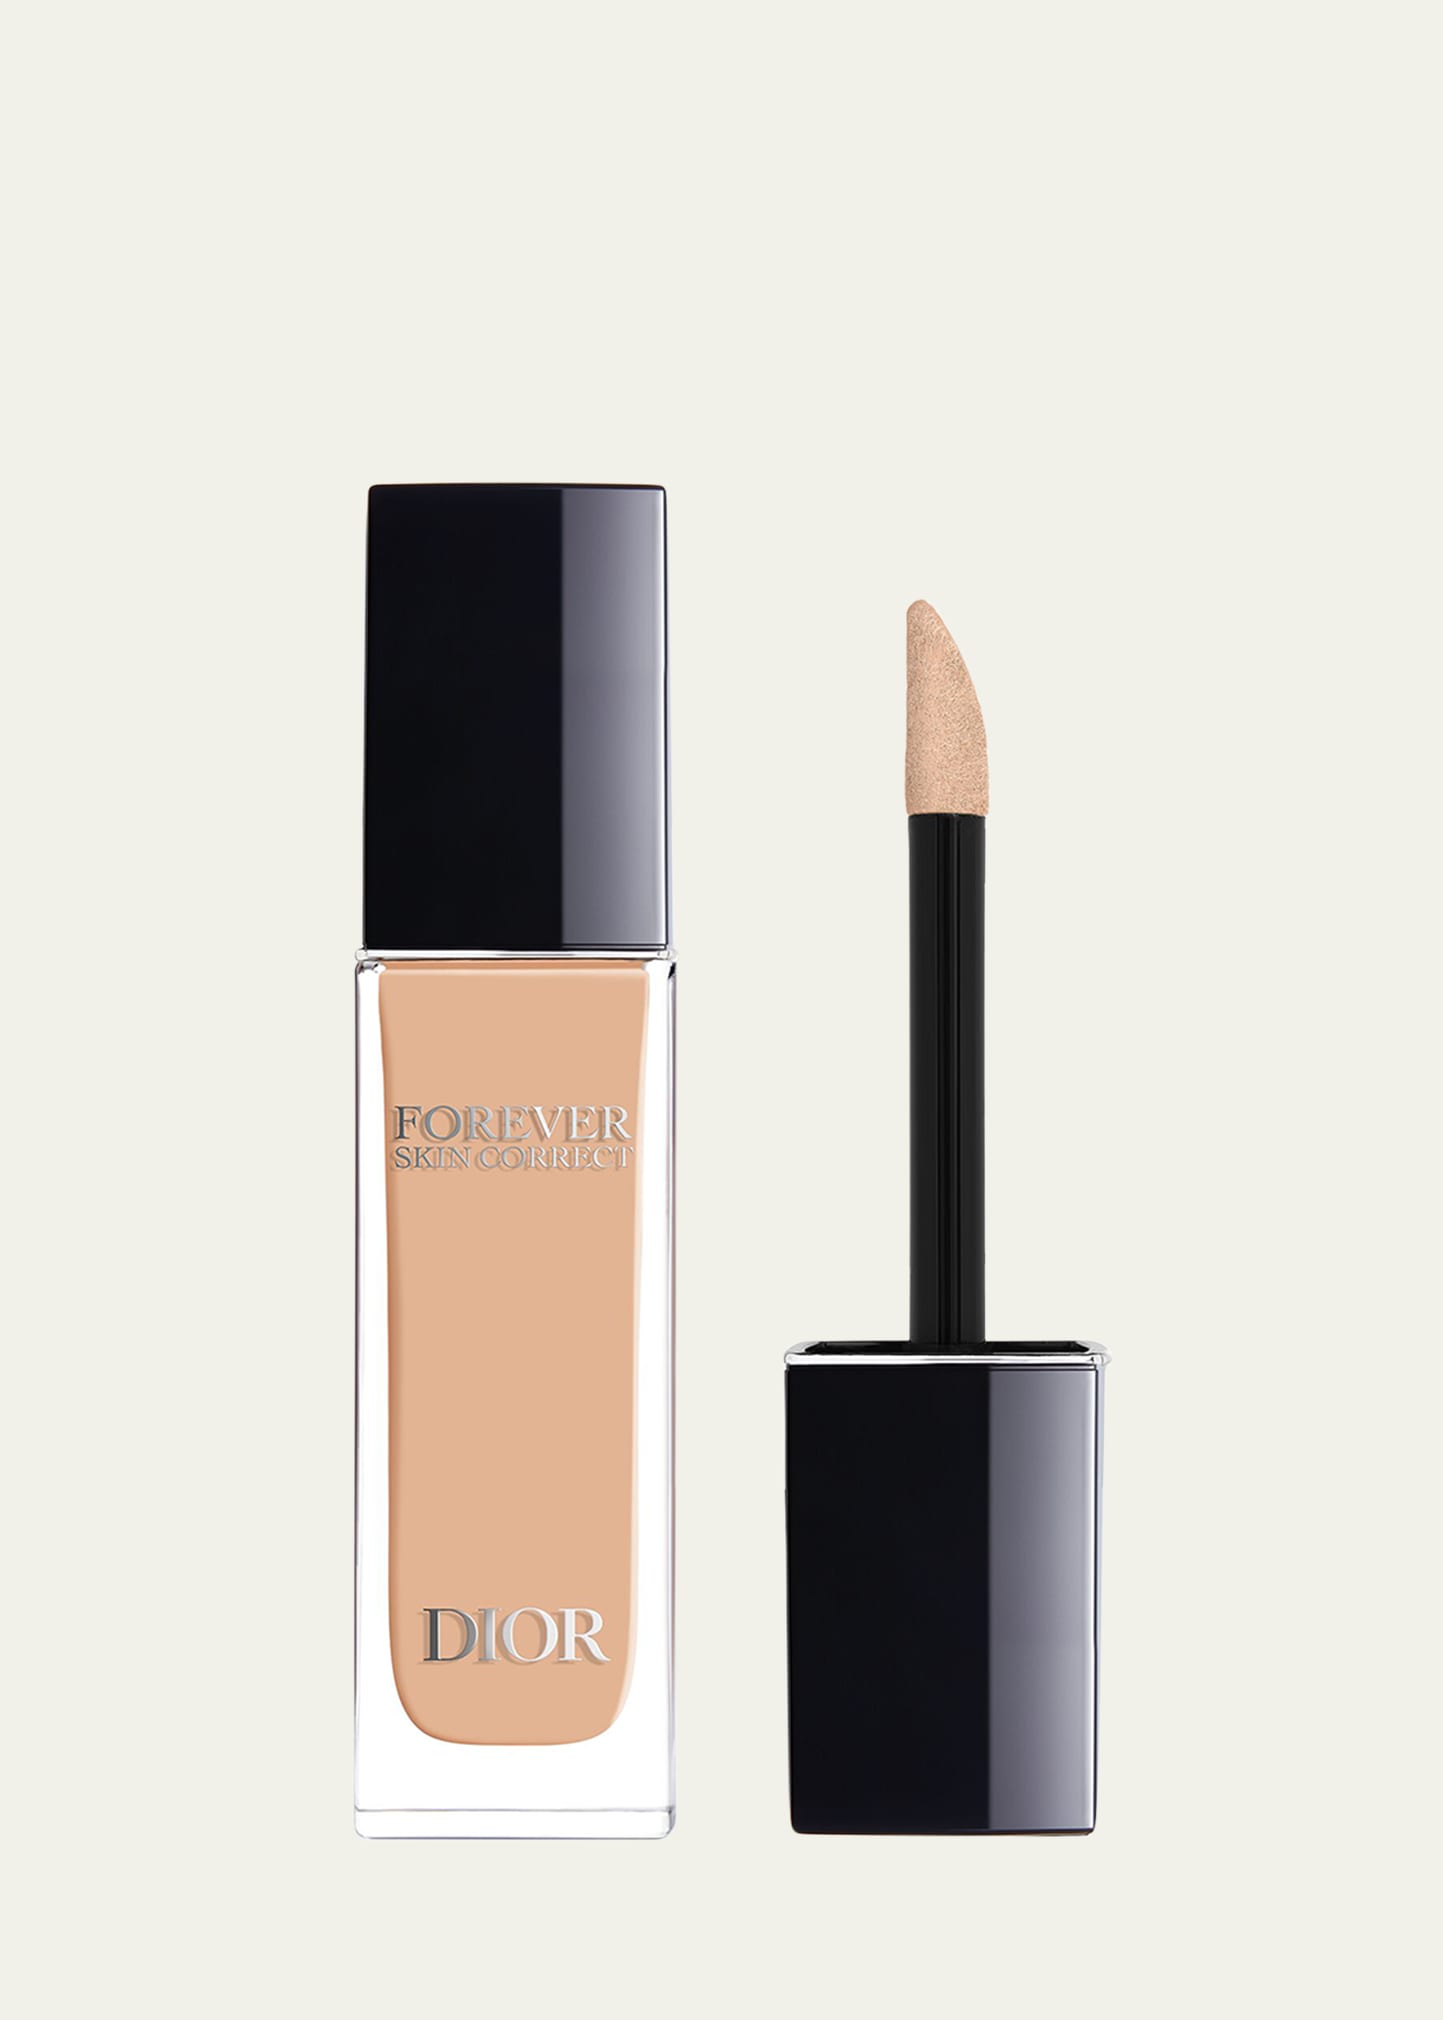 Dior Forever Skin Correct Full-coverage Concealer In 3 Wp Warm Peach